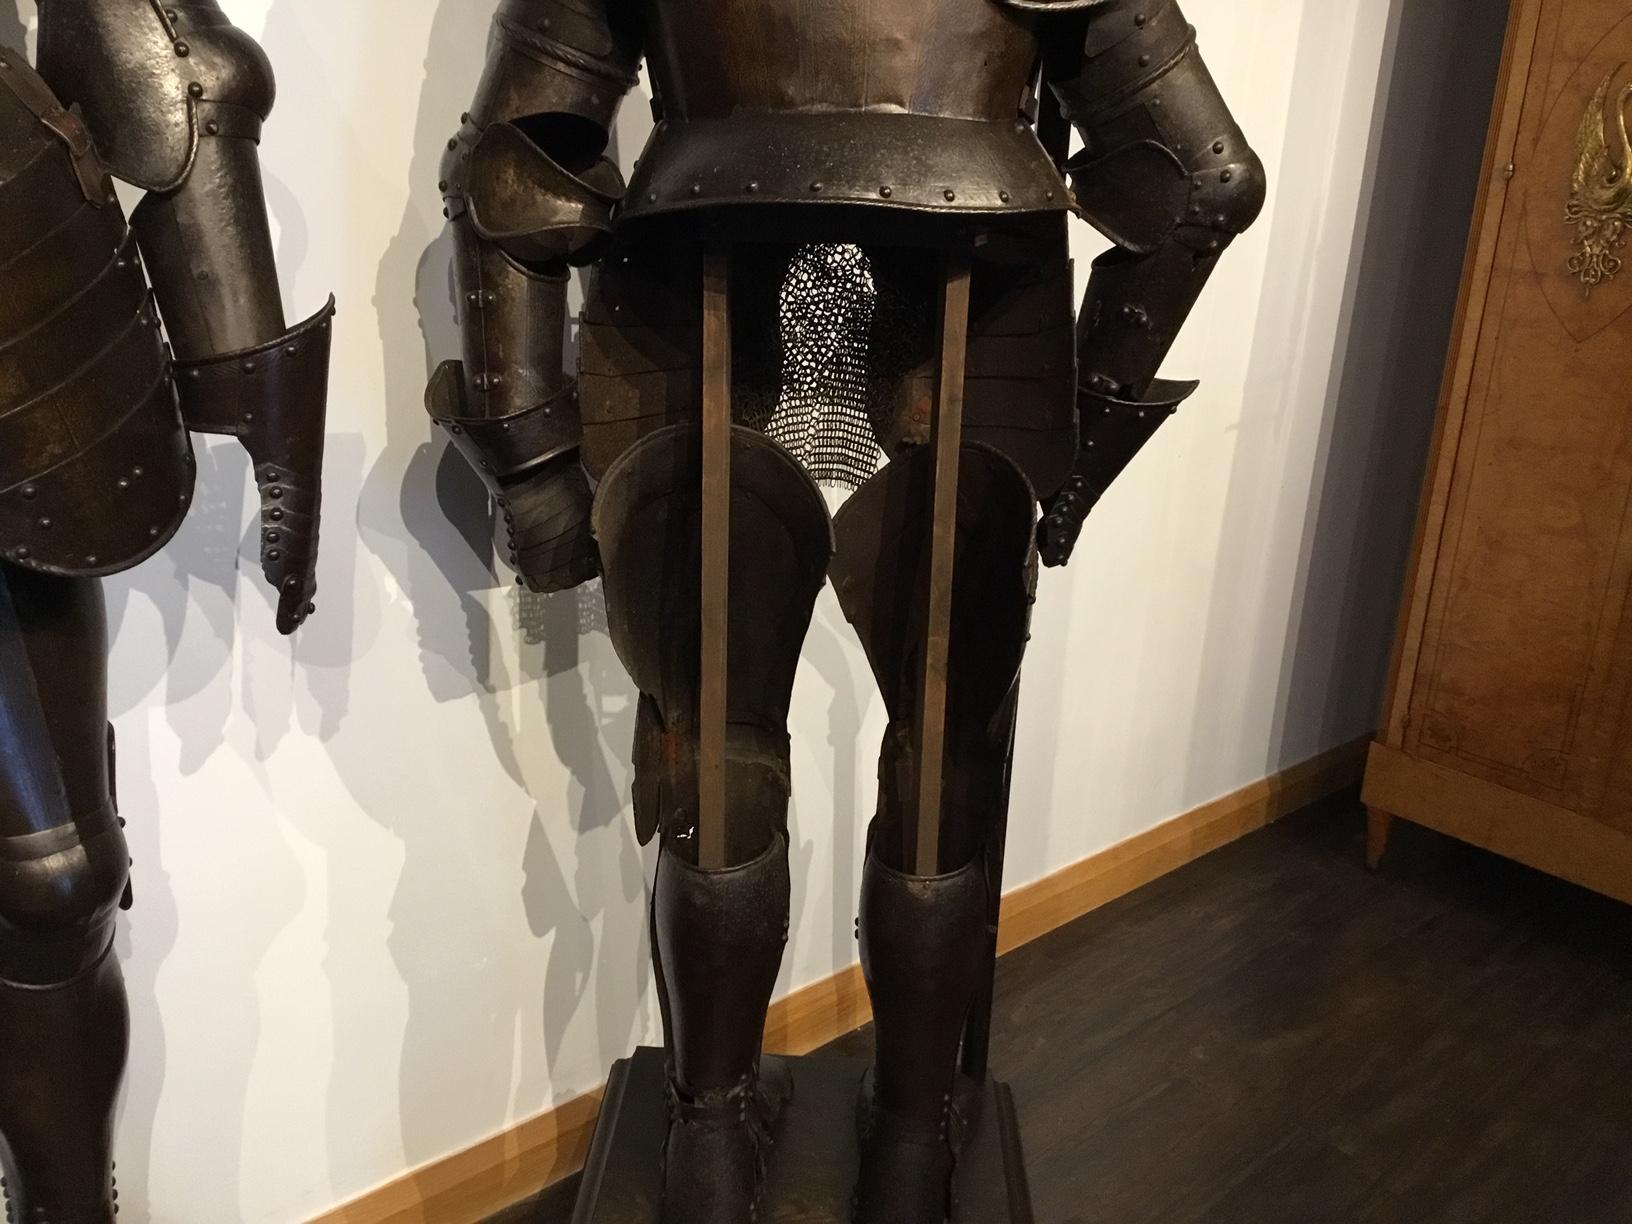 Magnificent Pair of 19th Century Suit of Armour in the 16th Century Style For Sale 12